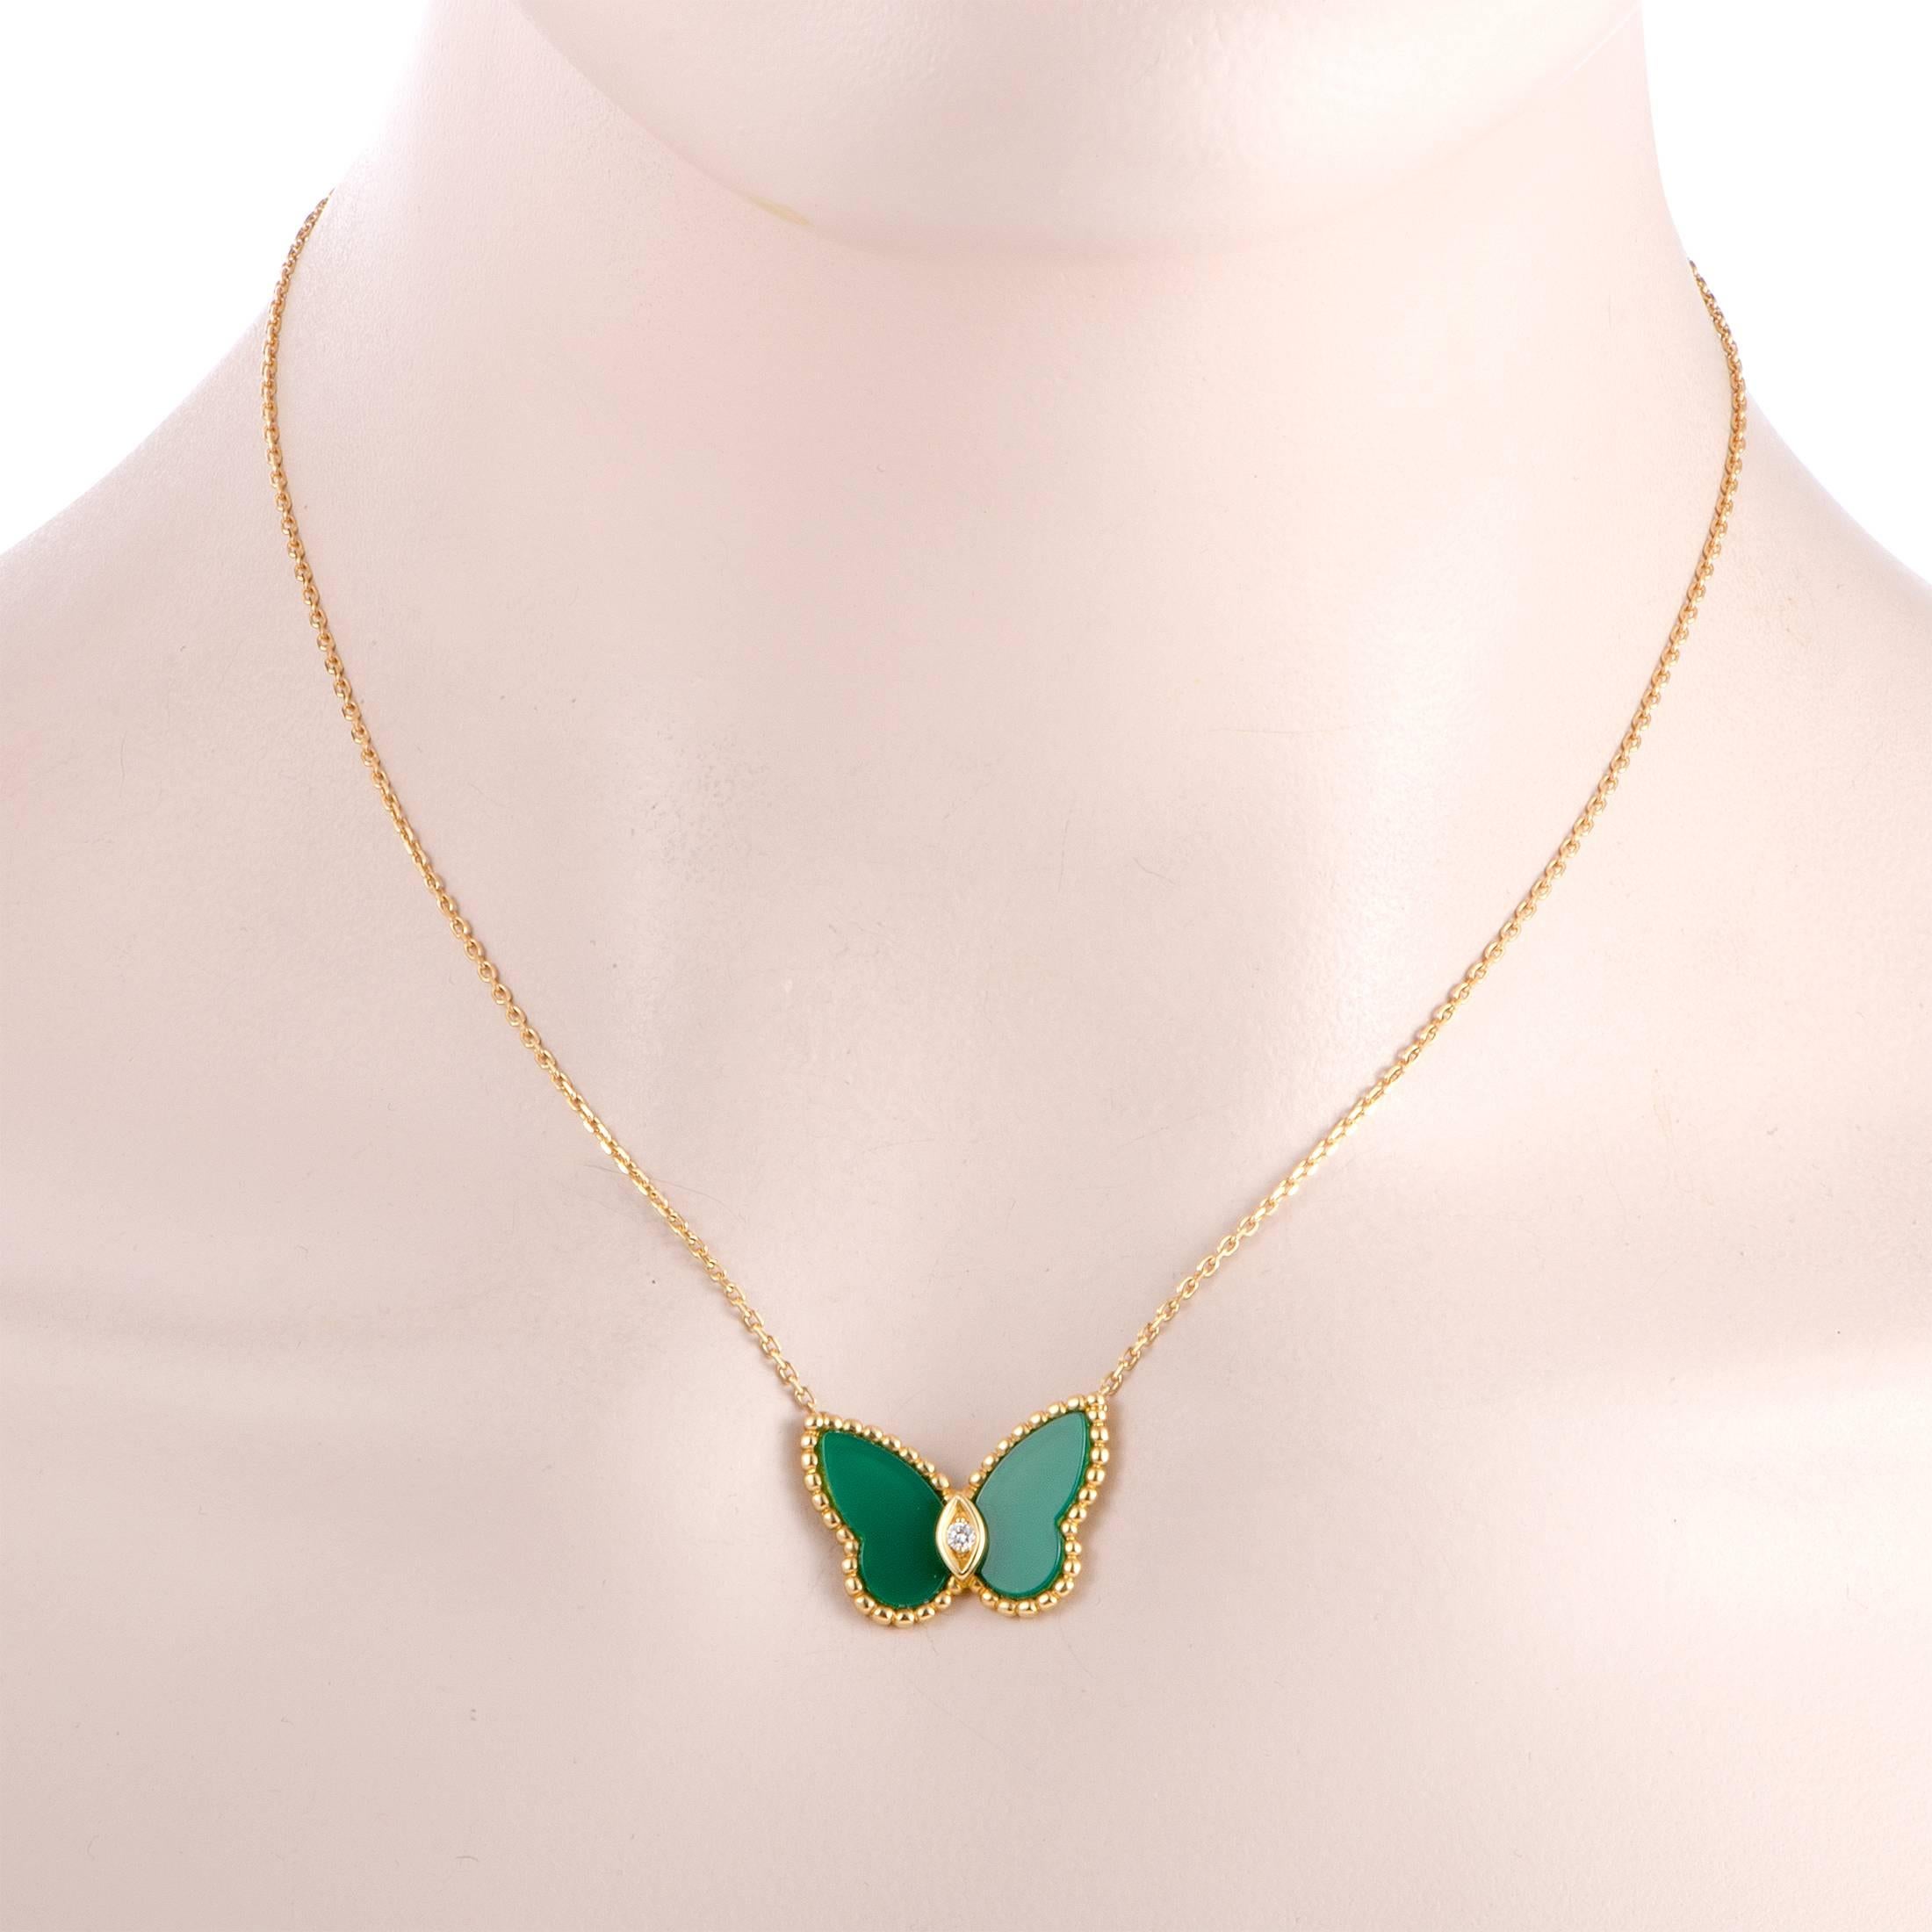 Featuring an endearingly feminine design that Van Cleef & Arpels pieces are renowned for, this gorgeous necklace is an item of immense aesthetic value. The necklace is made of 18K yellow gold and embellished with eye-catching green chalcedony and a